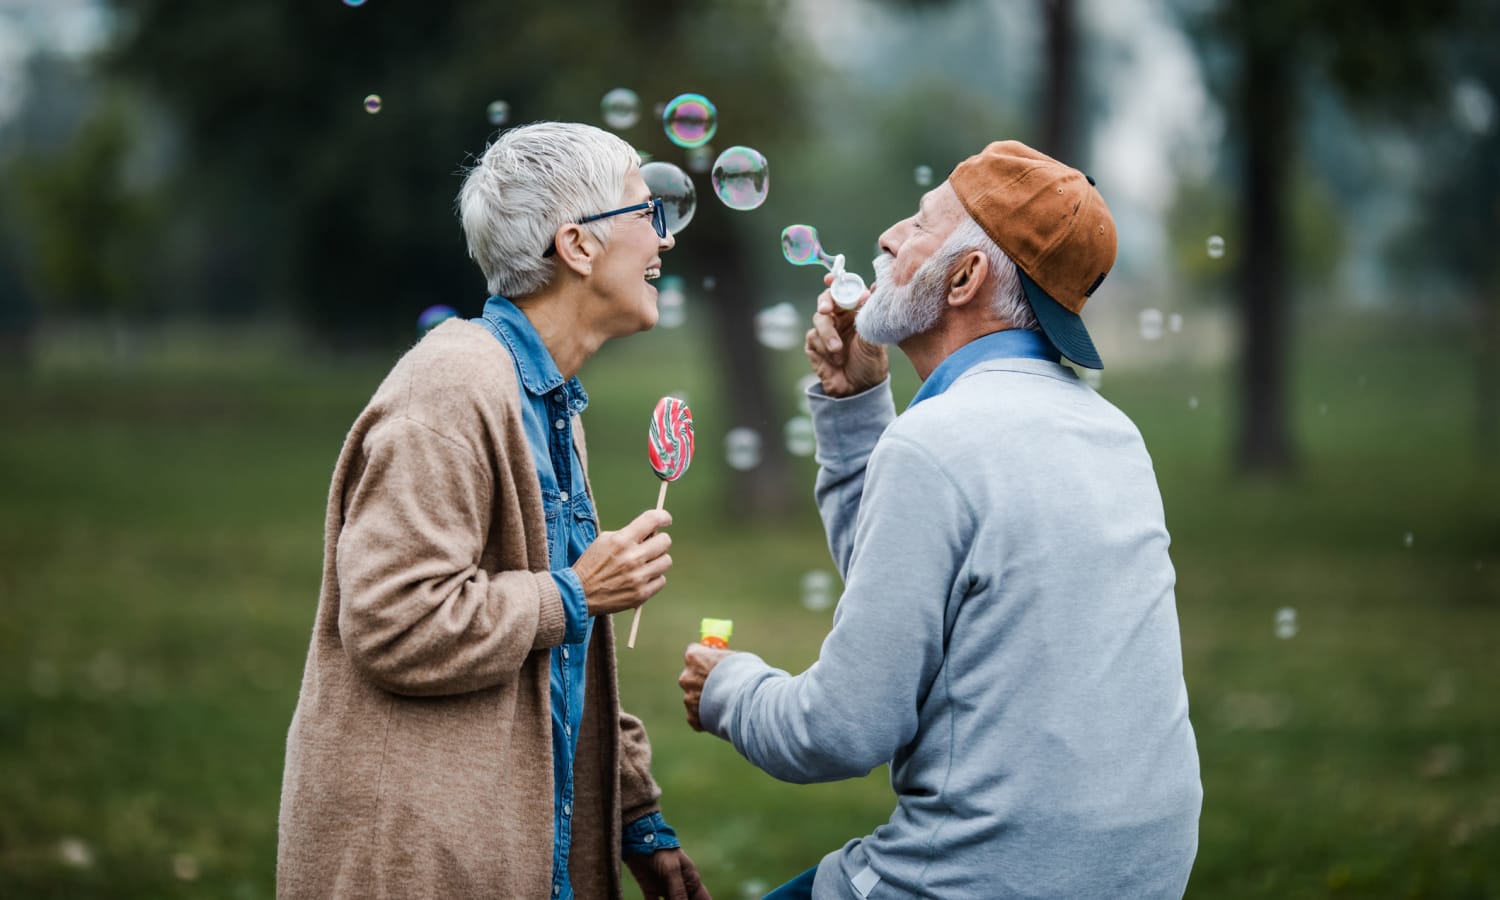 Residents blowing bubbles at Sweetbriar Villa in Springfield, Oregon